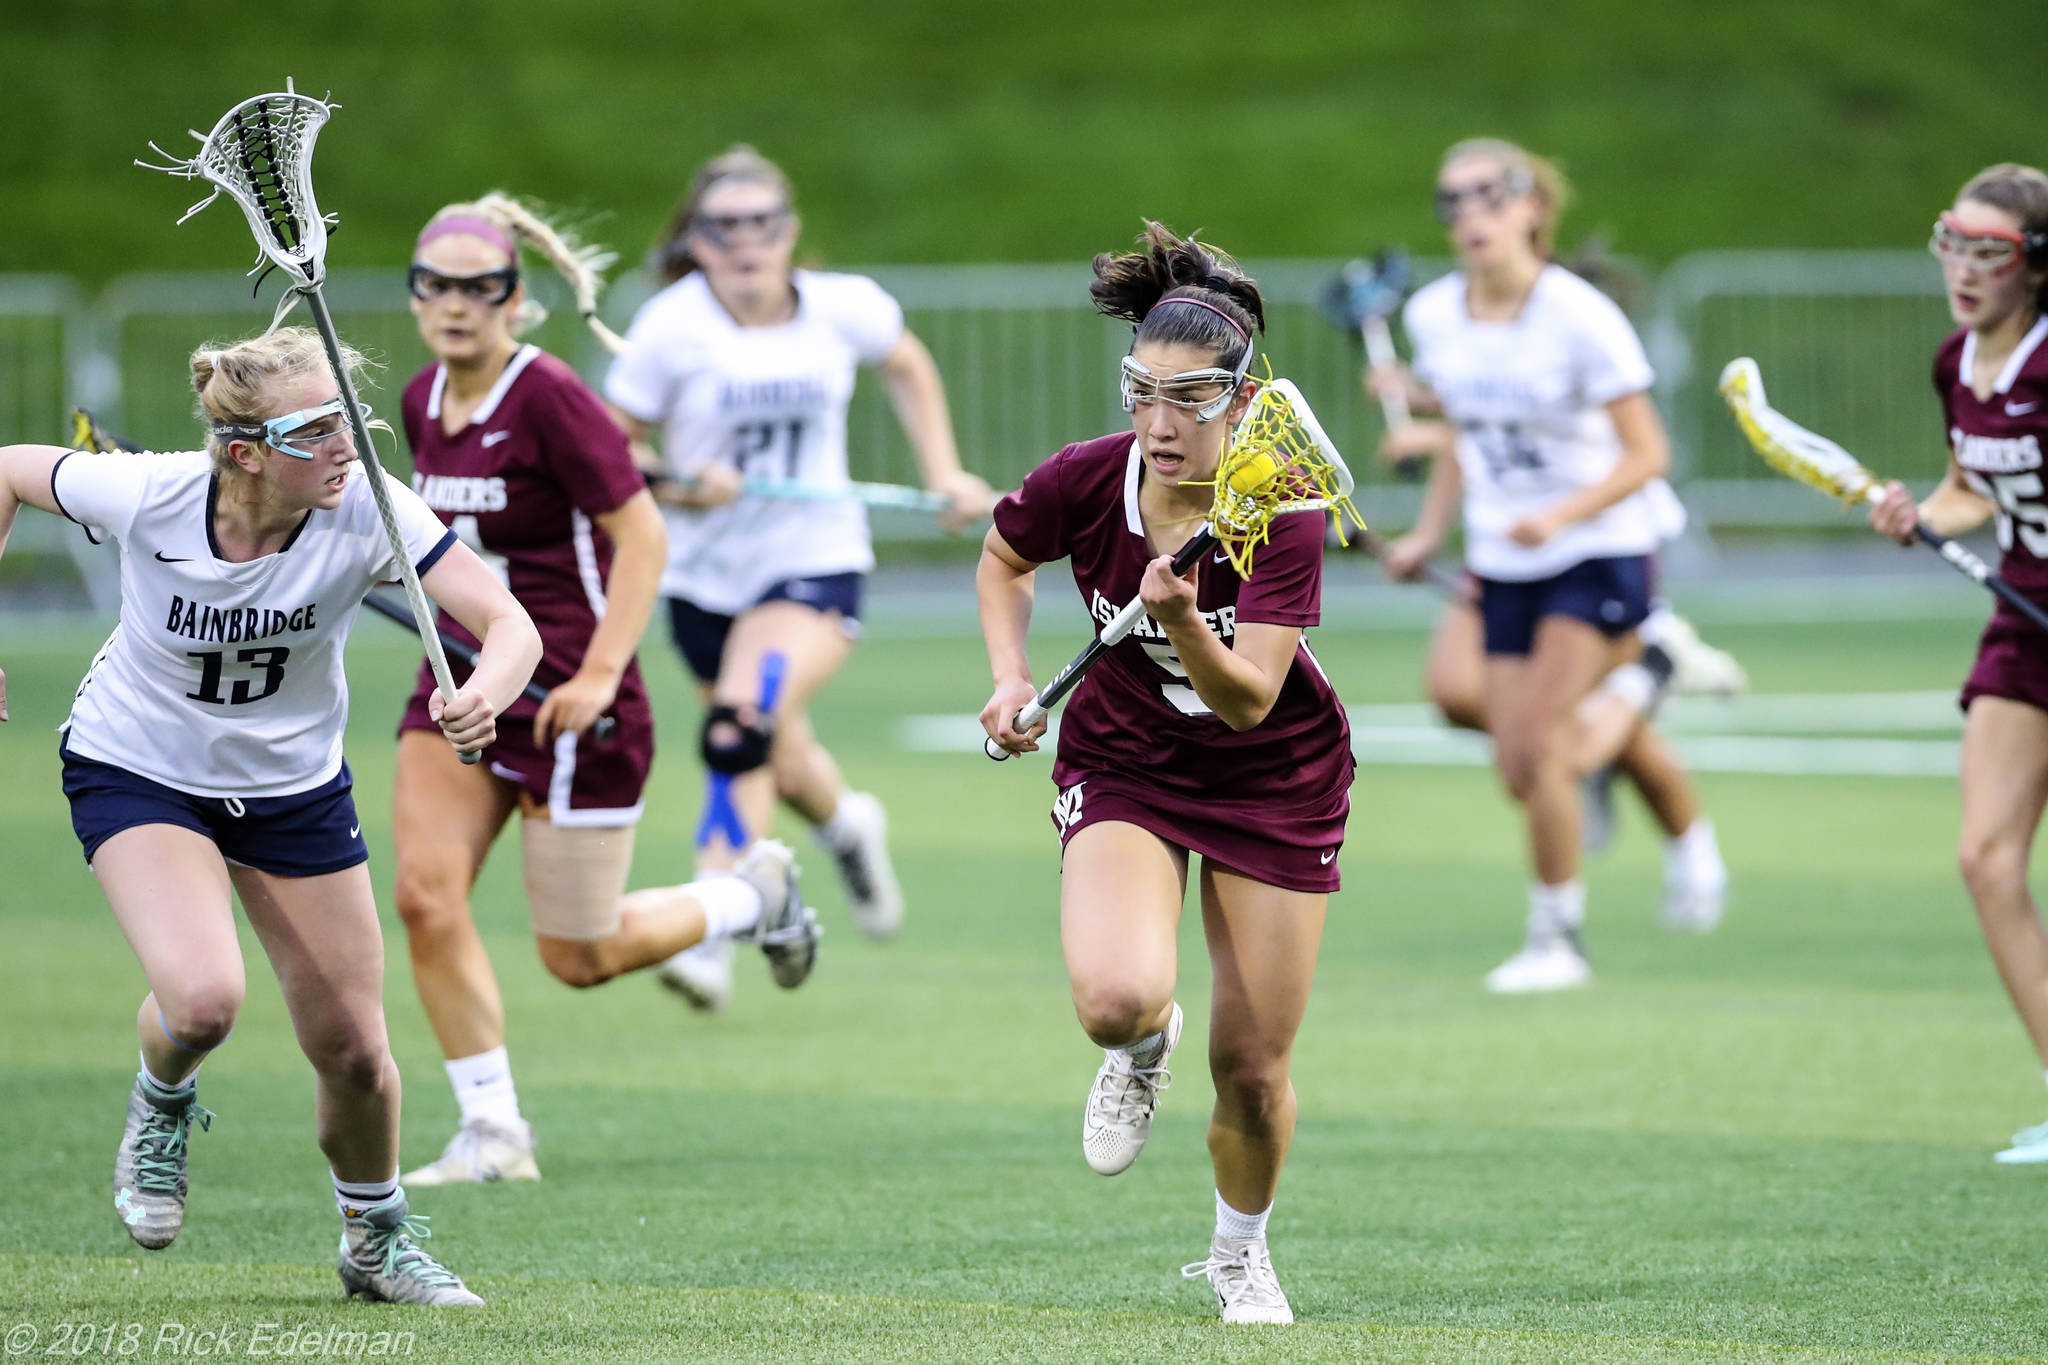 Photo courtesy of Rick Edelman/Rick Edelman Photography                                Mercer Island player Grace Fujinaga, who scored three goals in the state title game, carried the ball upfield while being chased by Bainbridge Island player Maggie Sweeney (left).